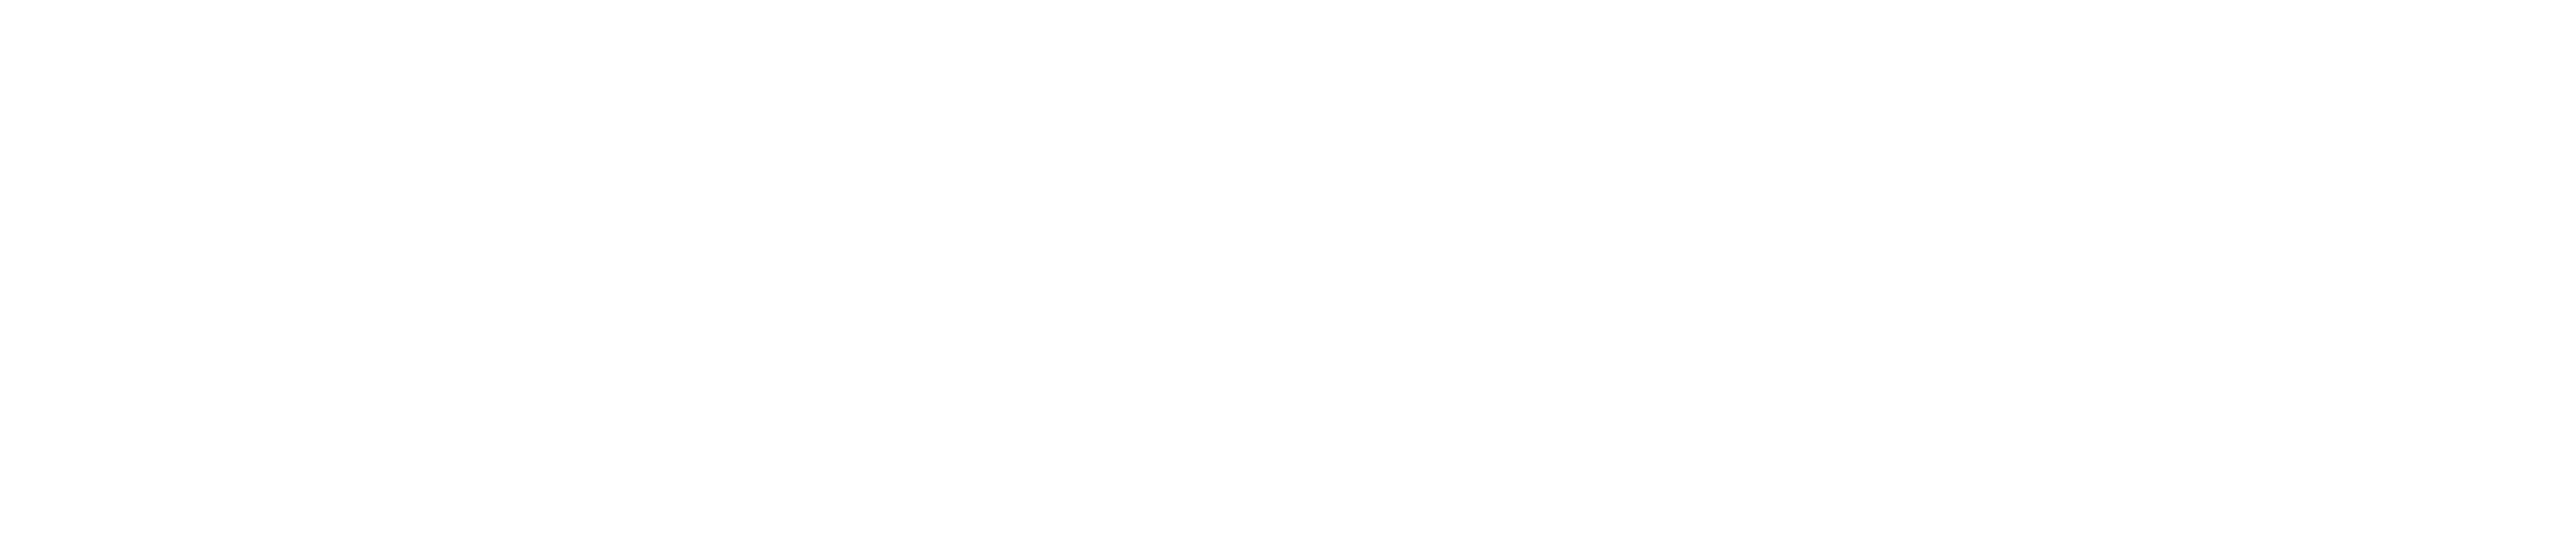 Product Demonstrations, Expert Advice, Expand Knowledge Base, Global Reach, Emerging Technologies, 200+ Industry Exhibits, Make Connections, Educational Sessions, Networking, Competetive Edge